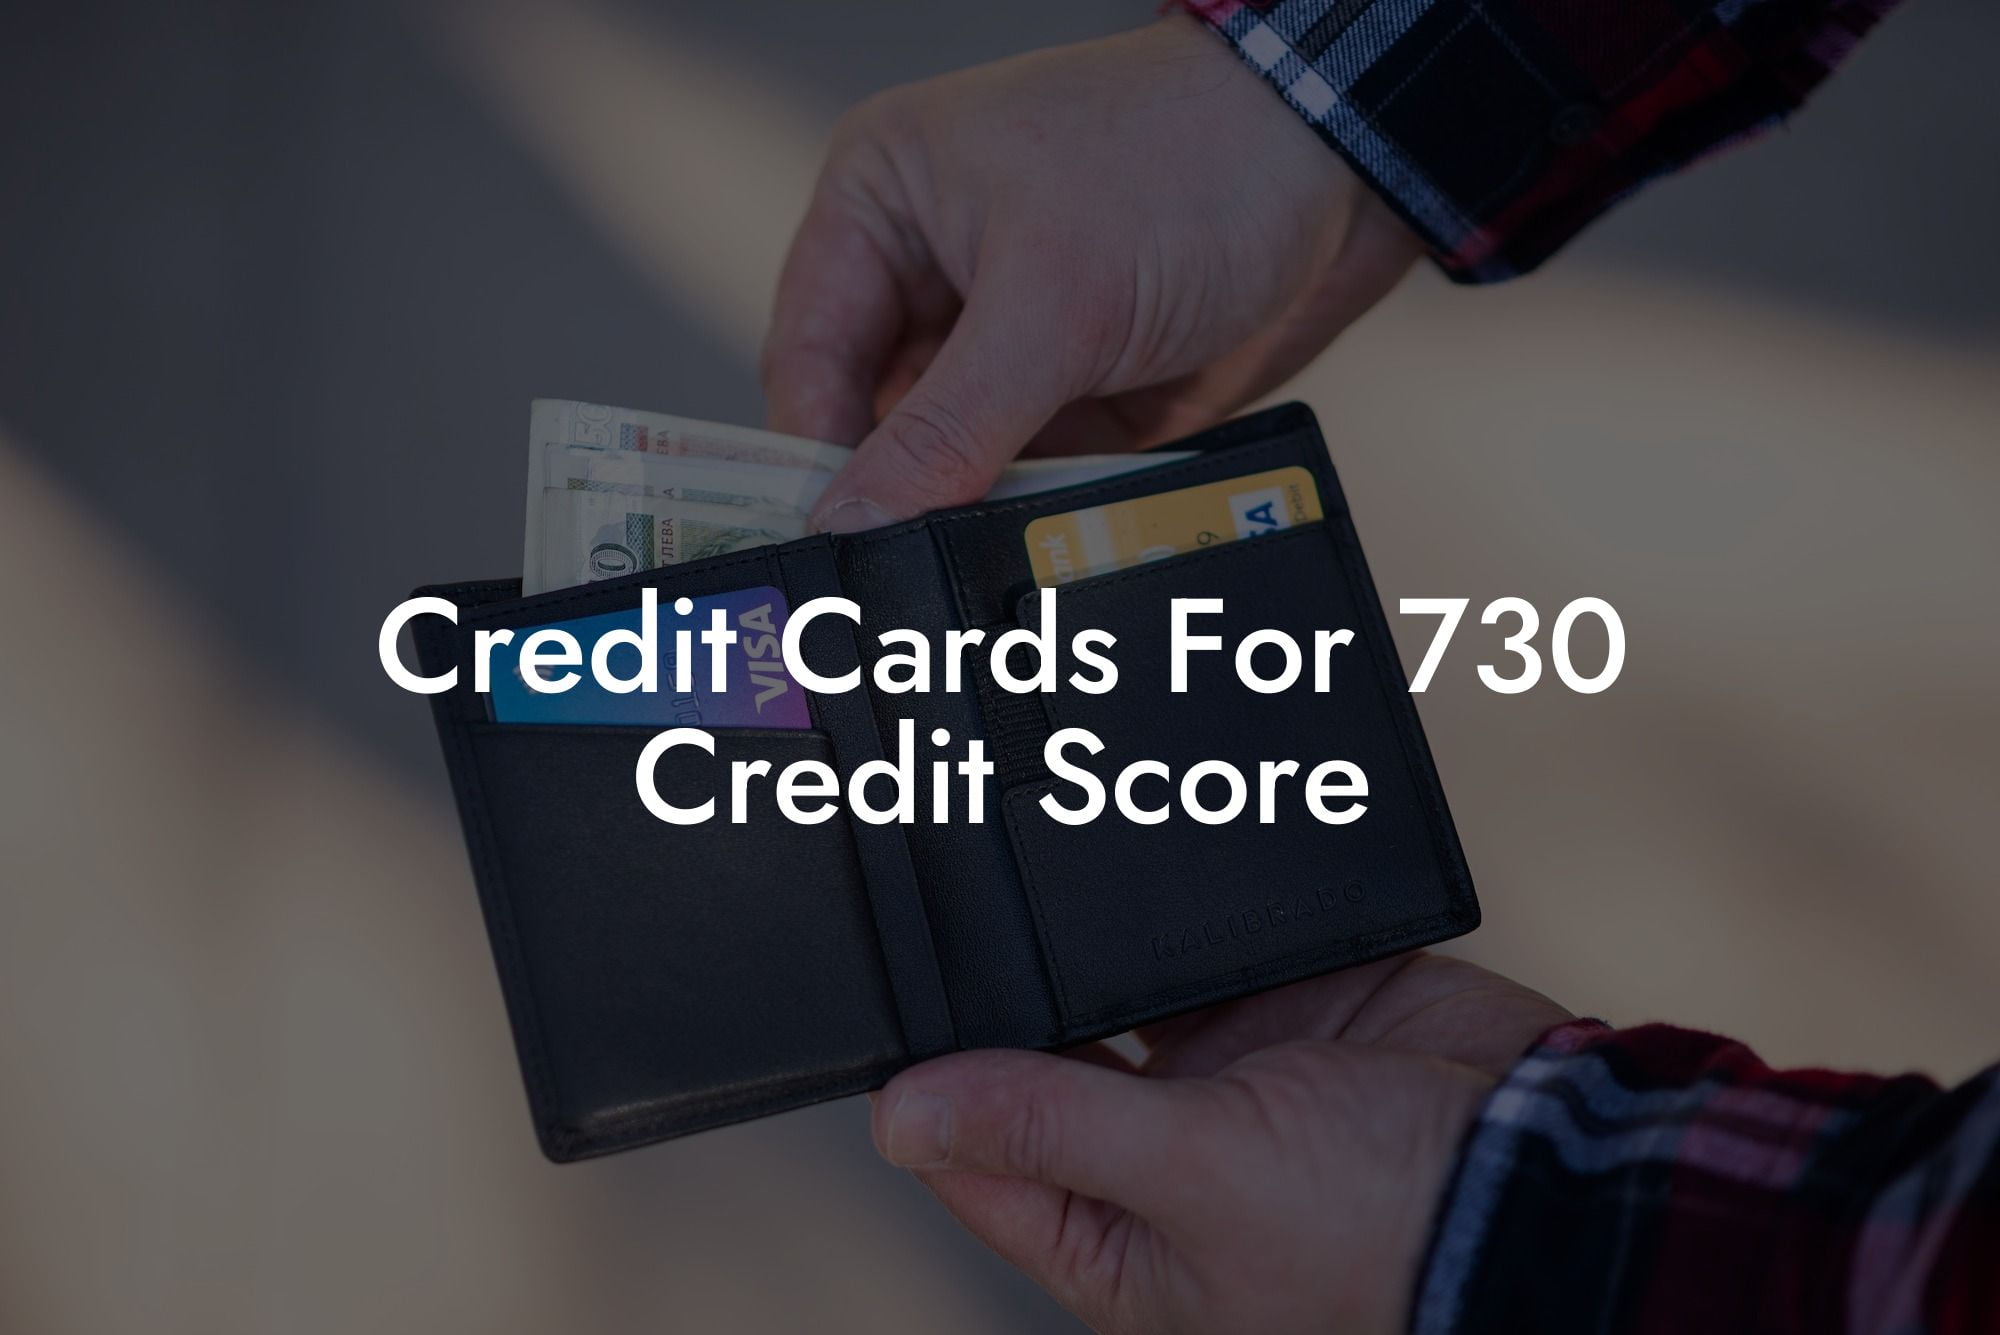 Credit Cards For 730 Credit Score